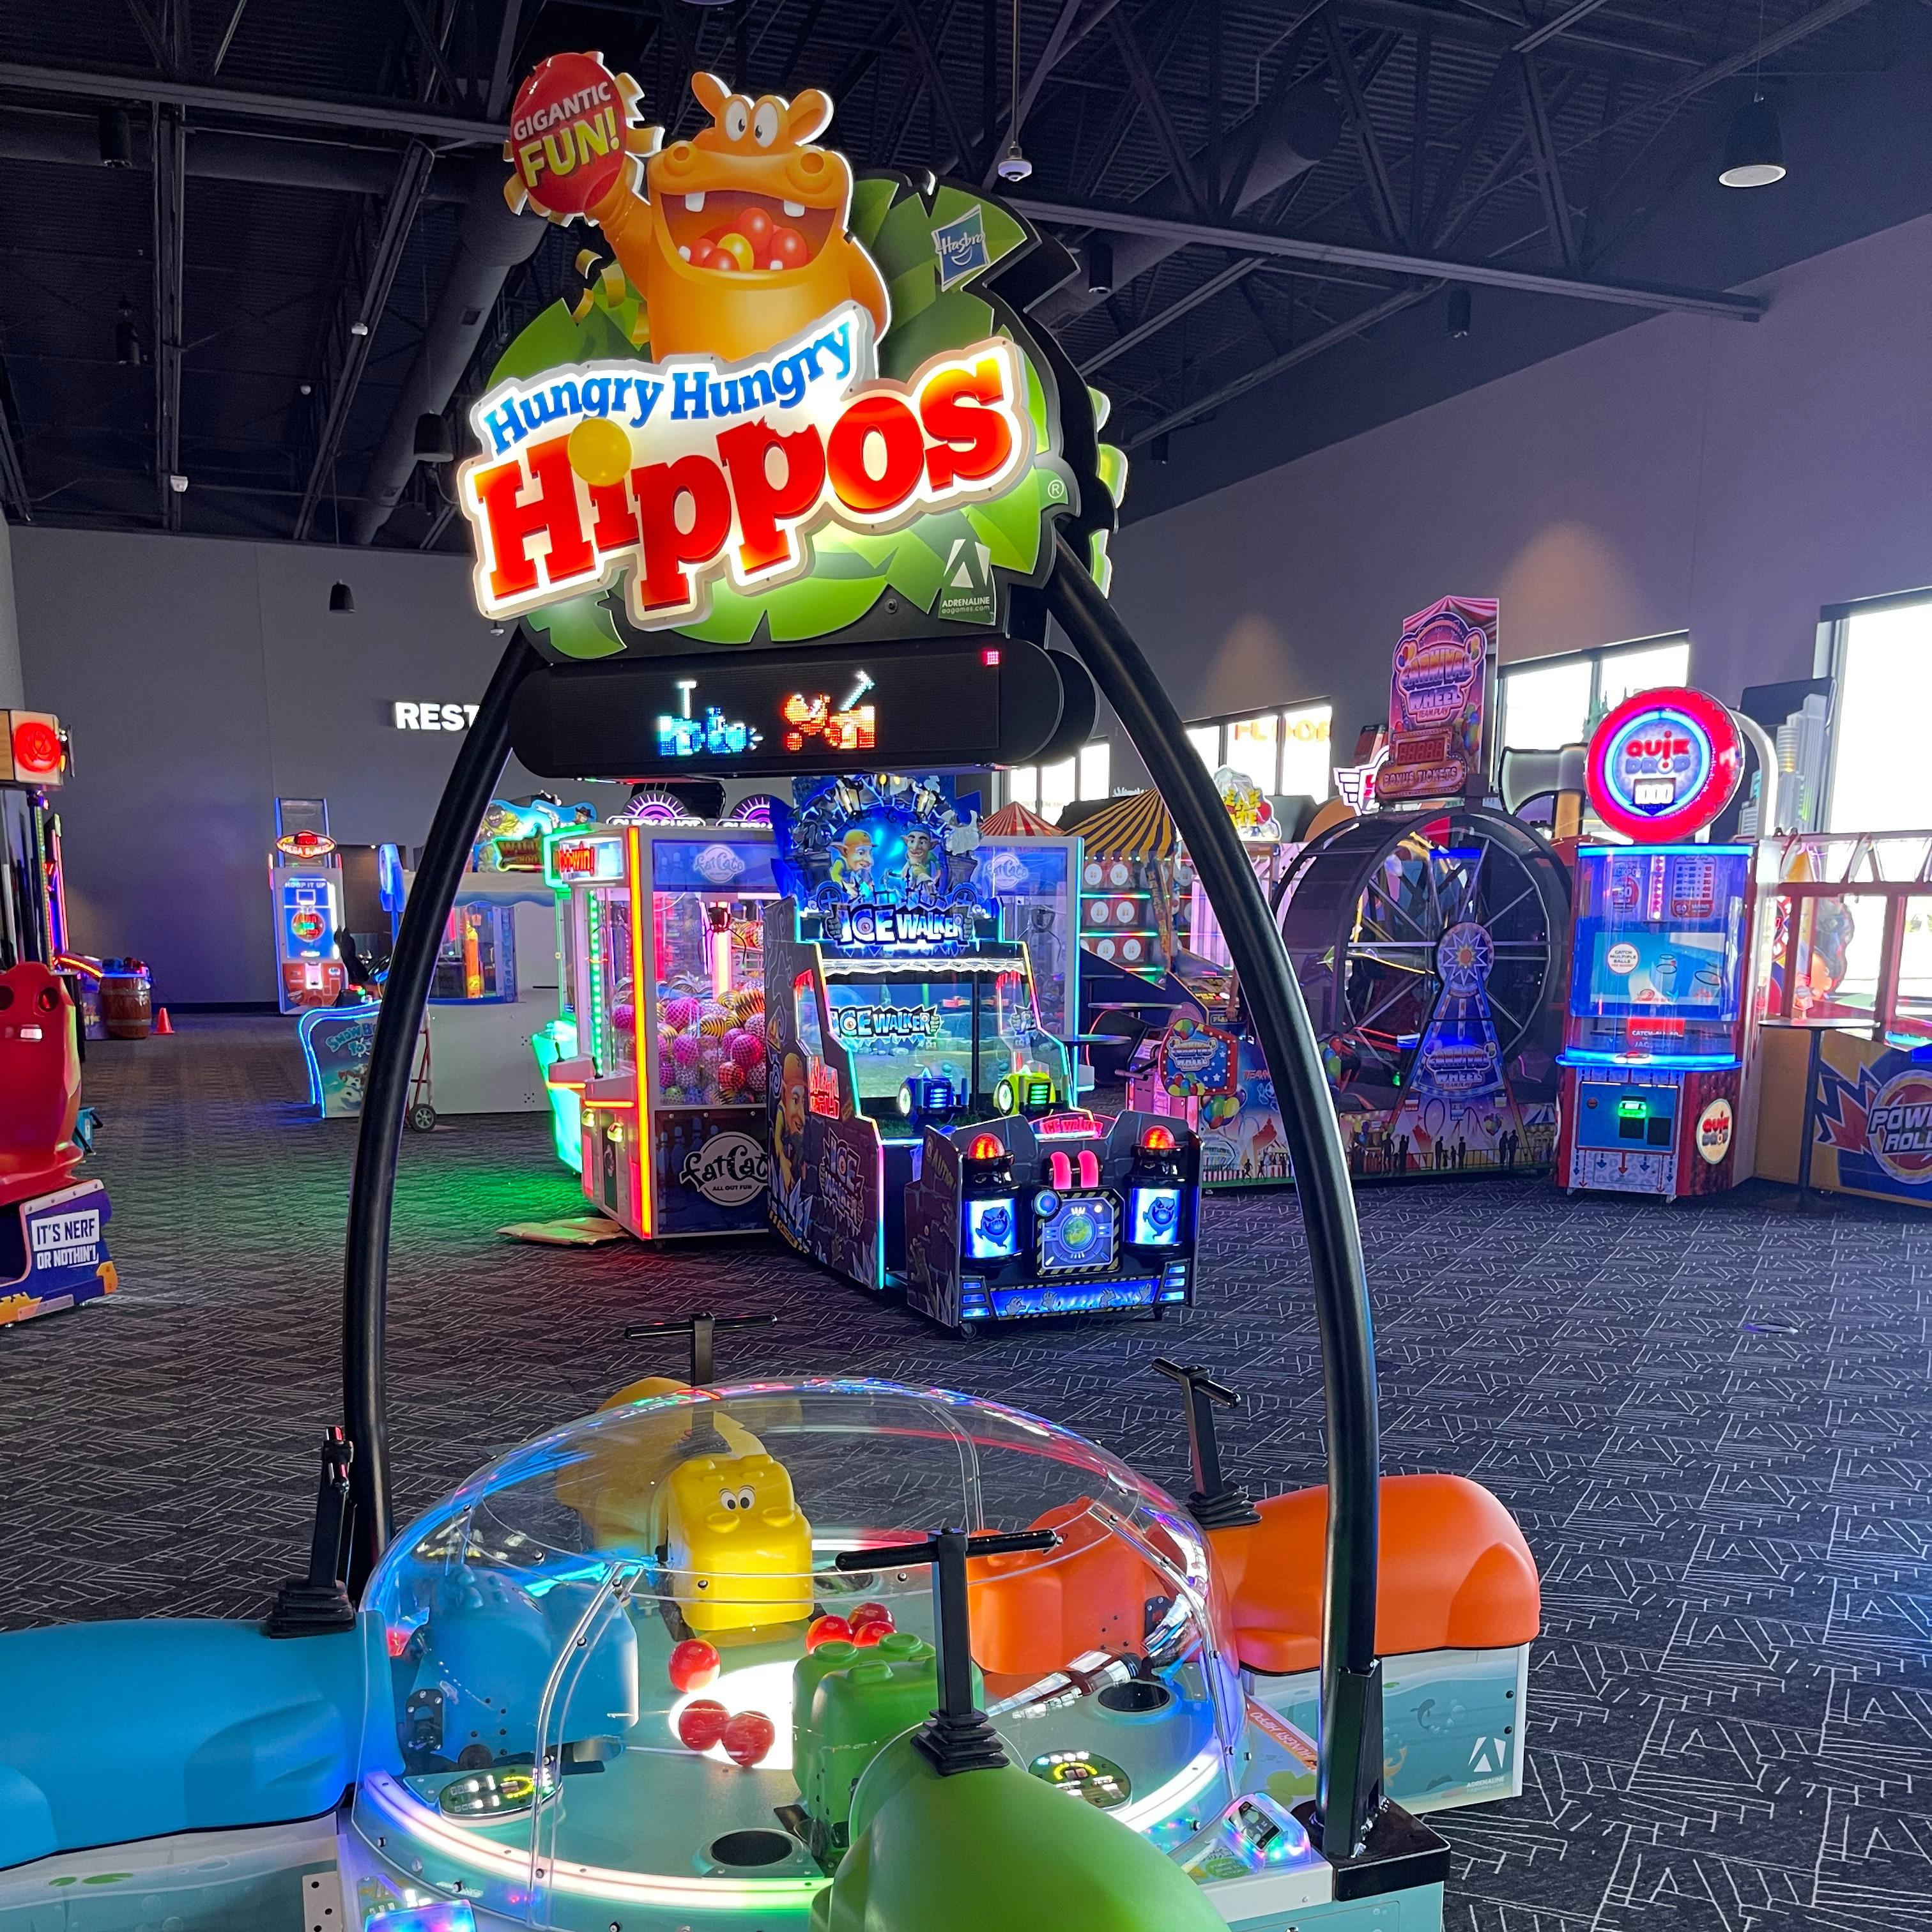 The arcade will feature over sixty of the latest and most popular arcade games plus a walk-in redemption store with high-quality prizes for all ages.